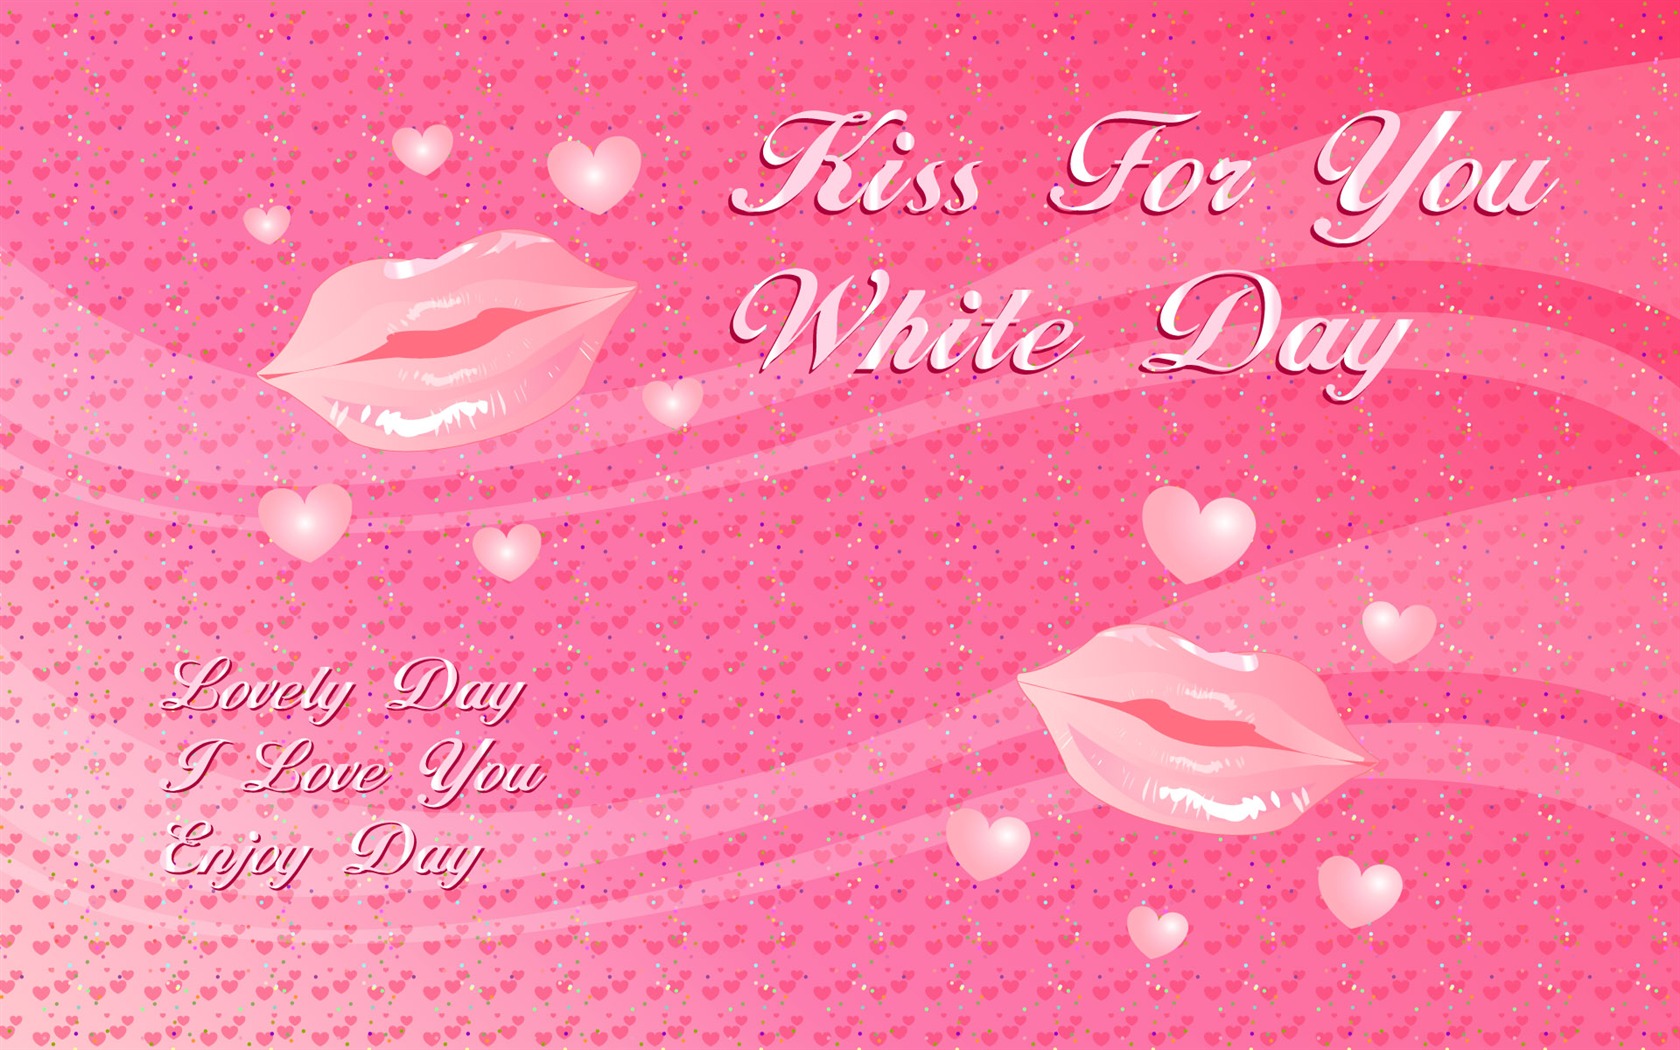 Valentine's Day Theme Wallpapers (1) #5 - 1680x1050